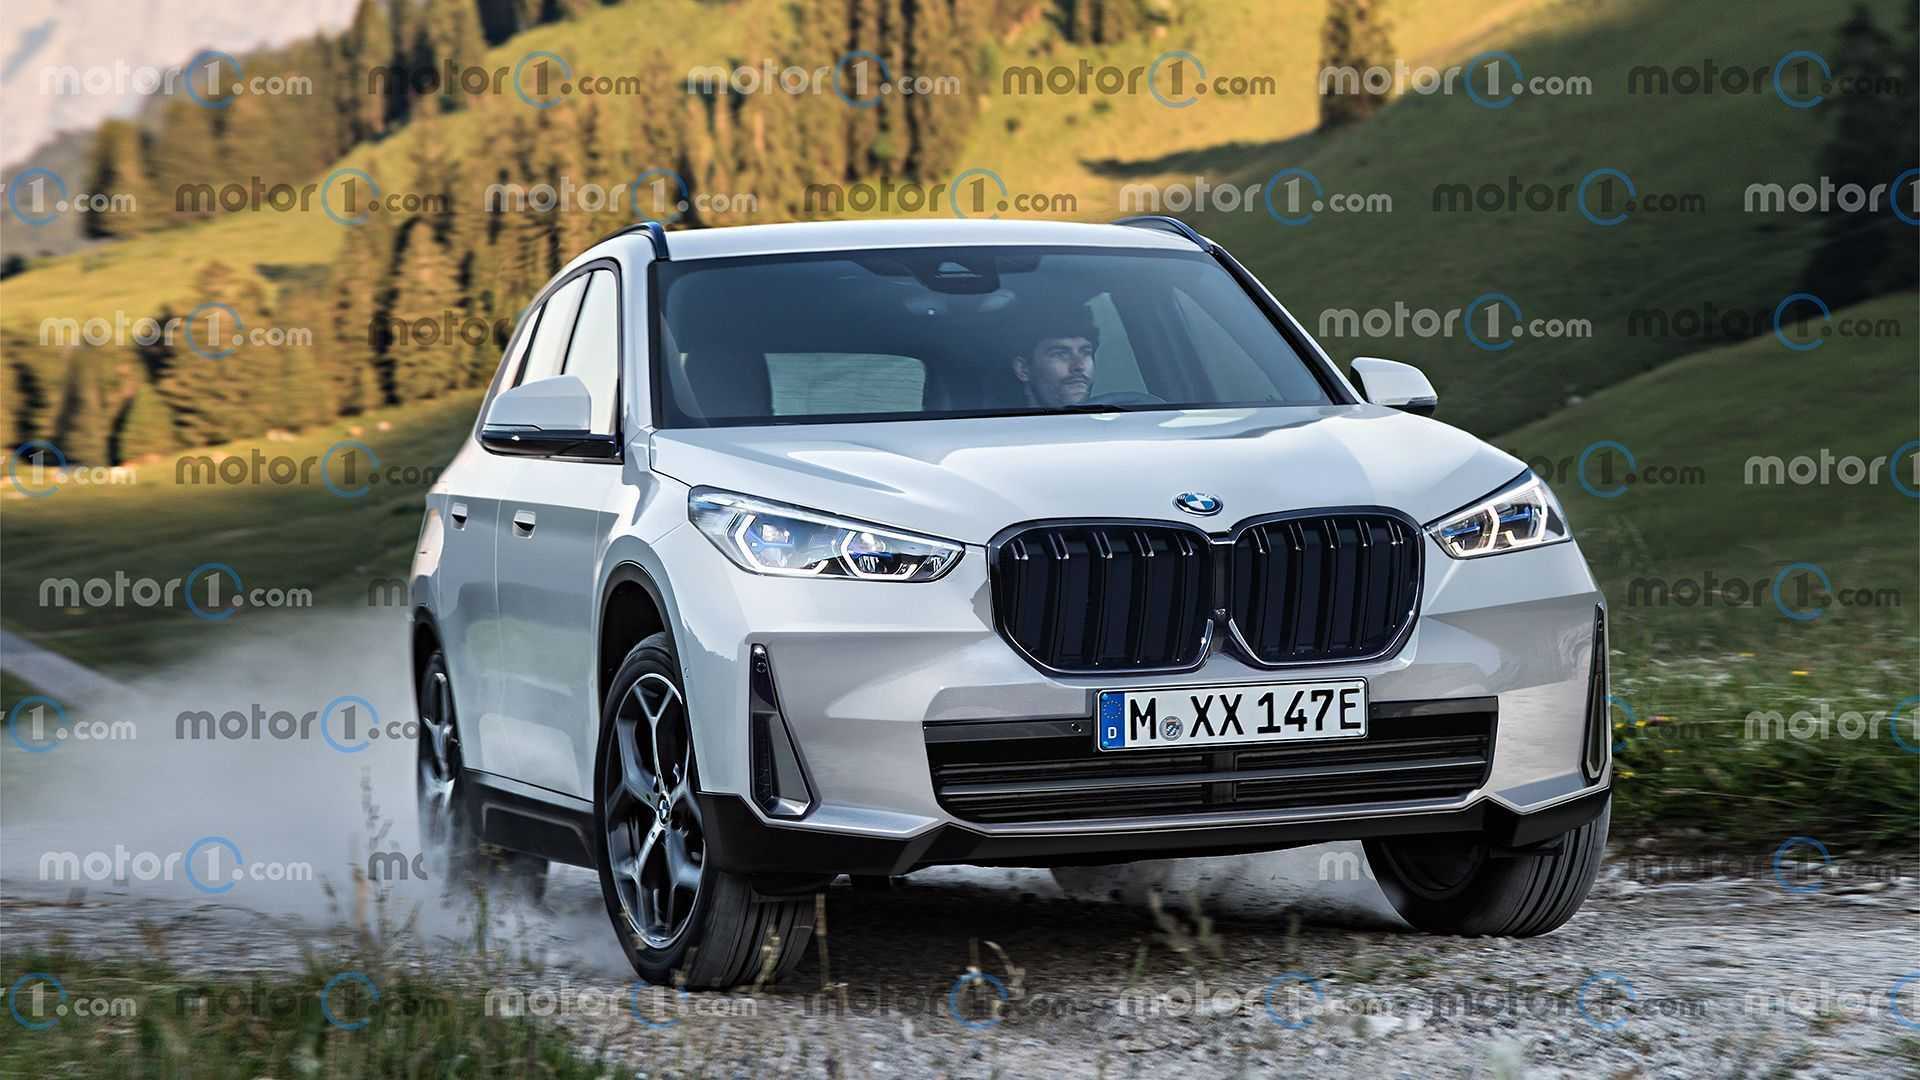 The new BMW X1 is revealed with a 'noseblown' design that is not